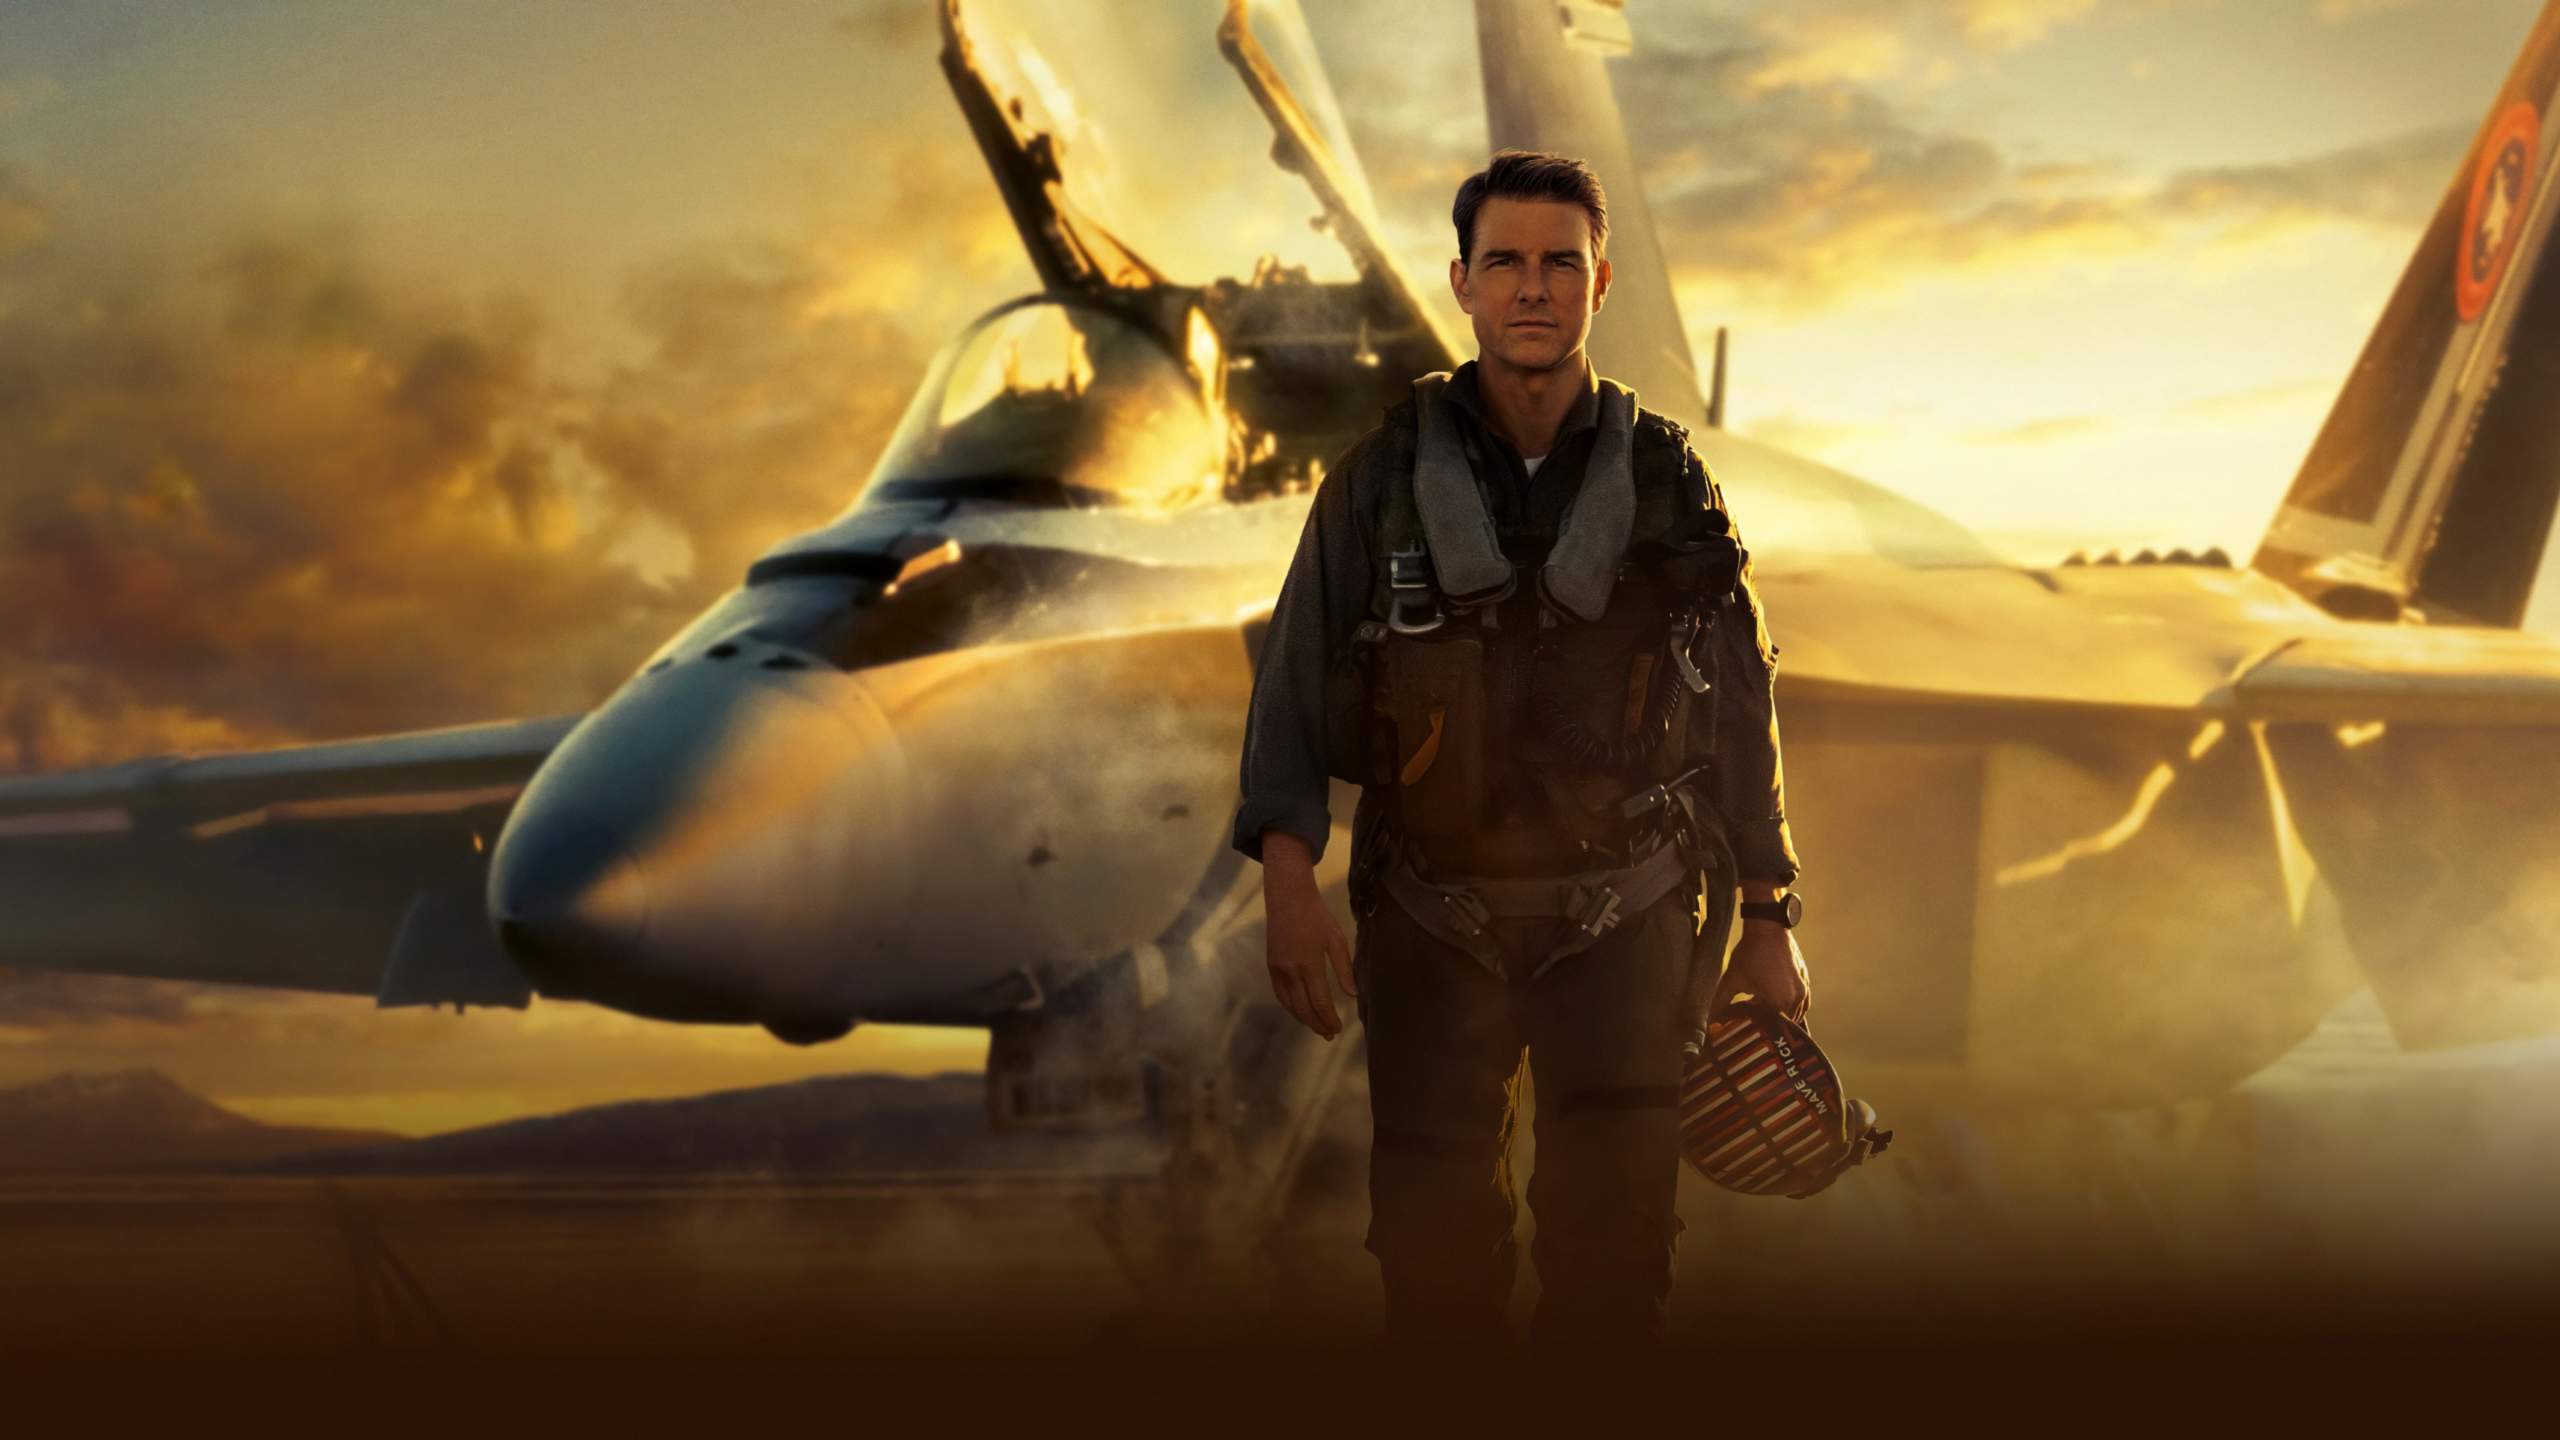 Thirty-six years later we finally got another installment in the <em>Top Gun</em> franchise. With even more action, fantastic aerial maneuvers, and Danger Zone. While Goose passed in the first installment, we get to see his son, Rooster (Miles Teller) take the reigns and eventually team up with Maverick to kick some ass. While theaters were still struggling to get people out to see movies, <em>Top Gun: Maverick</em> drew people out in droves and raked in nearly $1.5 billion in profits (the highest of Cruise's career). This movie hit all the right notes of nostalgia while still giving us something new to enjoy. Perhaps we are looking at the start of another successful franchise for Tom Cruise to make more sequels.